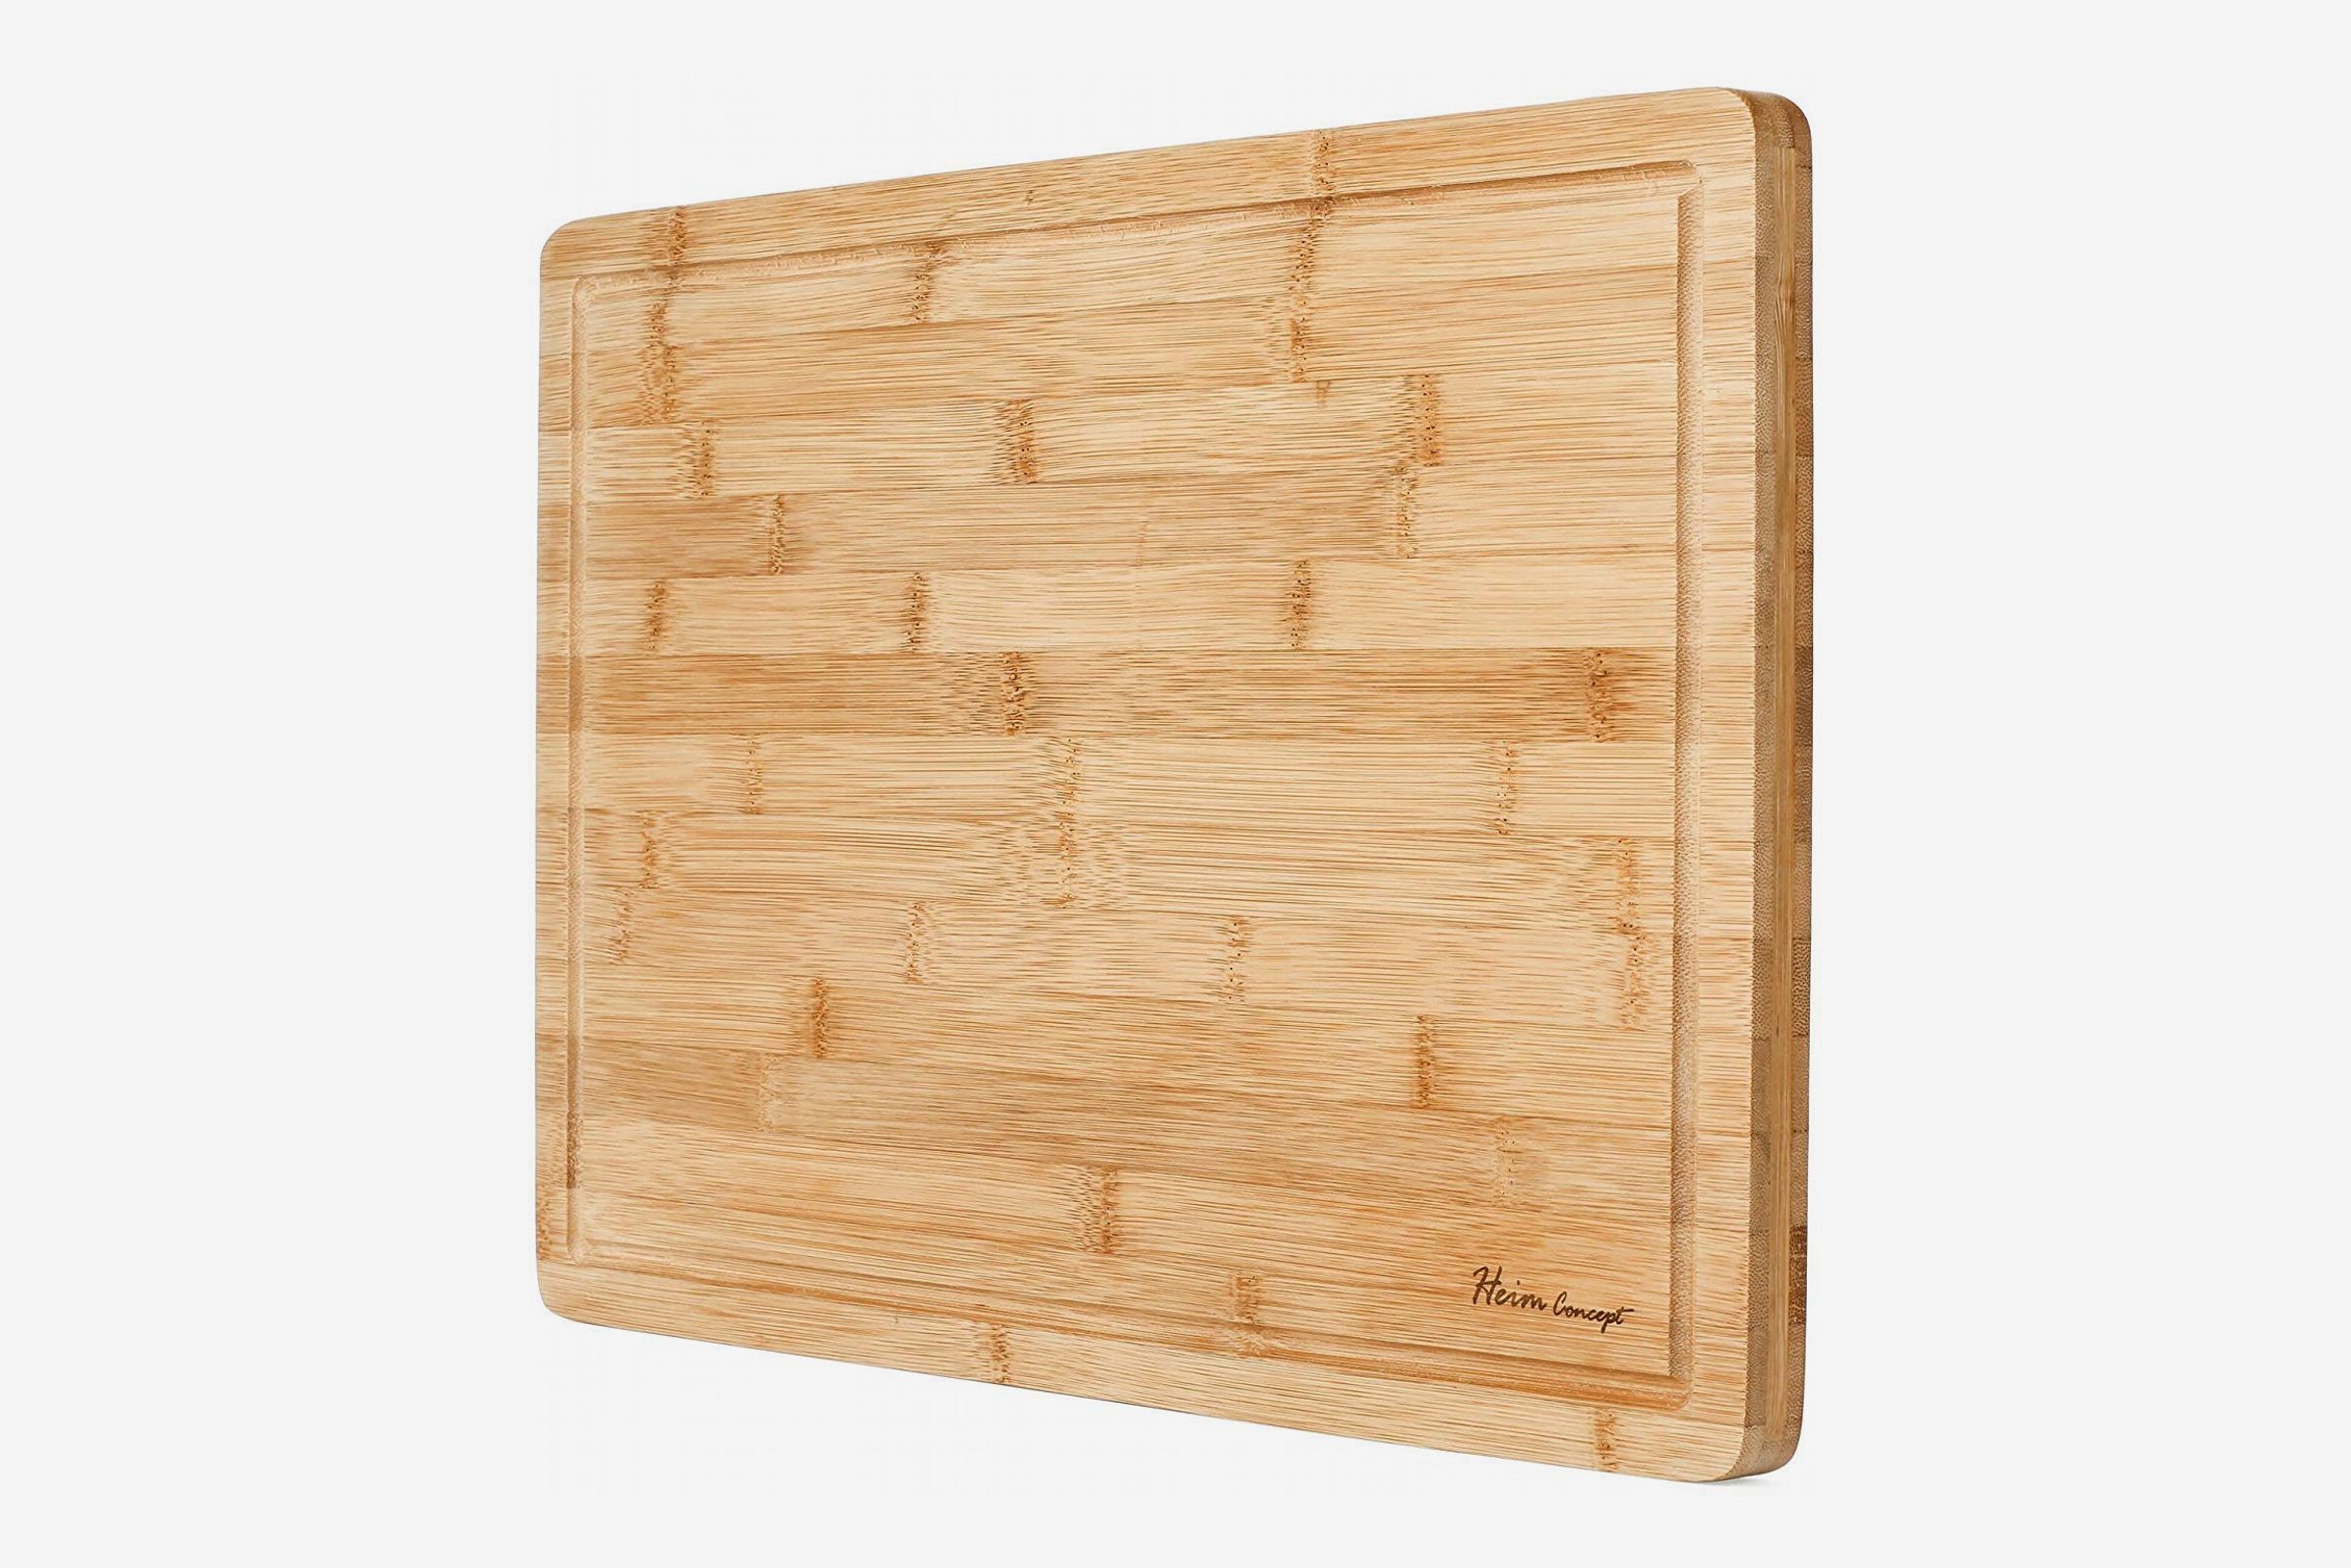 Misty Wood Scenery Novelty Tempered Glass Chopping Board